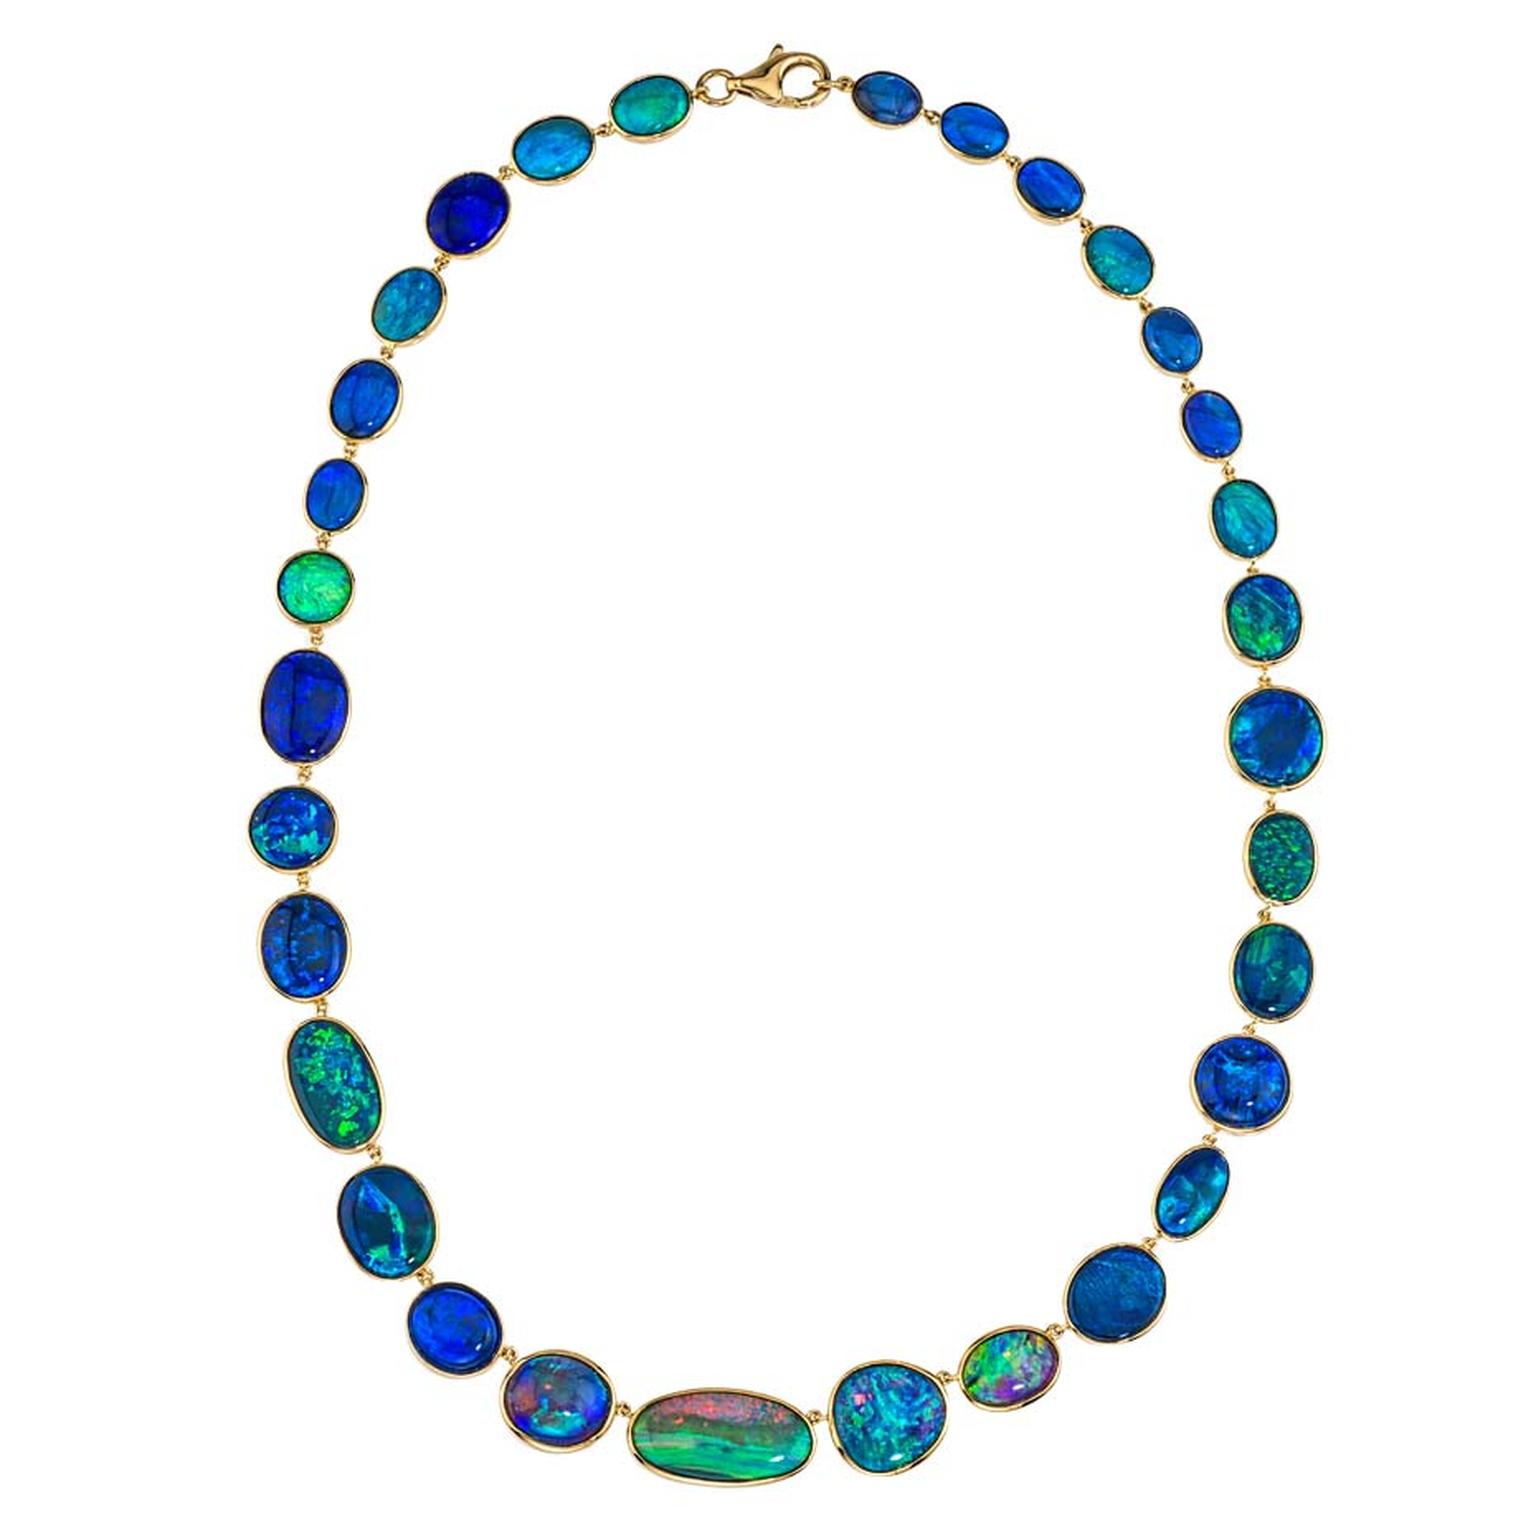 Katherine Jetter opal necklace, set with 59.58ct of mixed Australian opals in yellow gold.